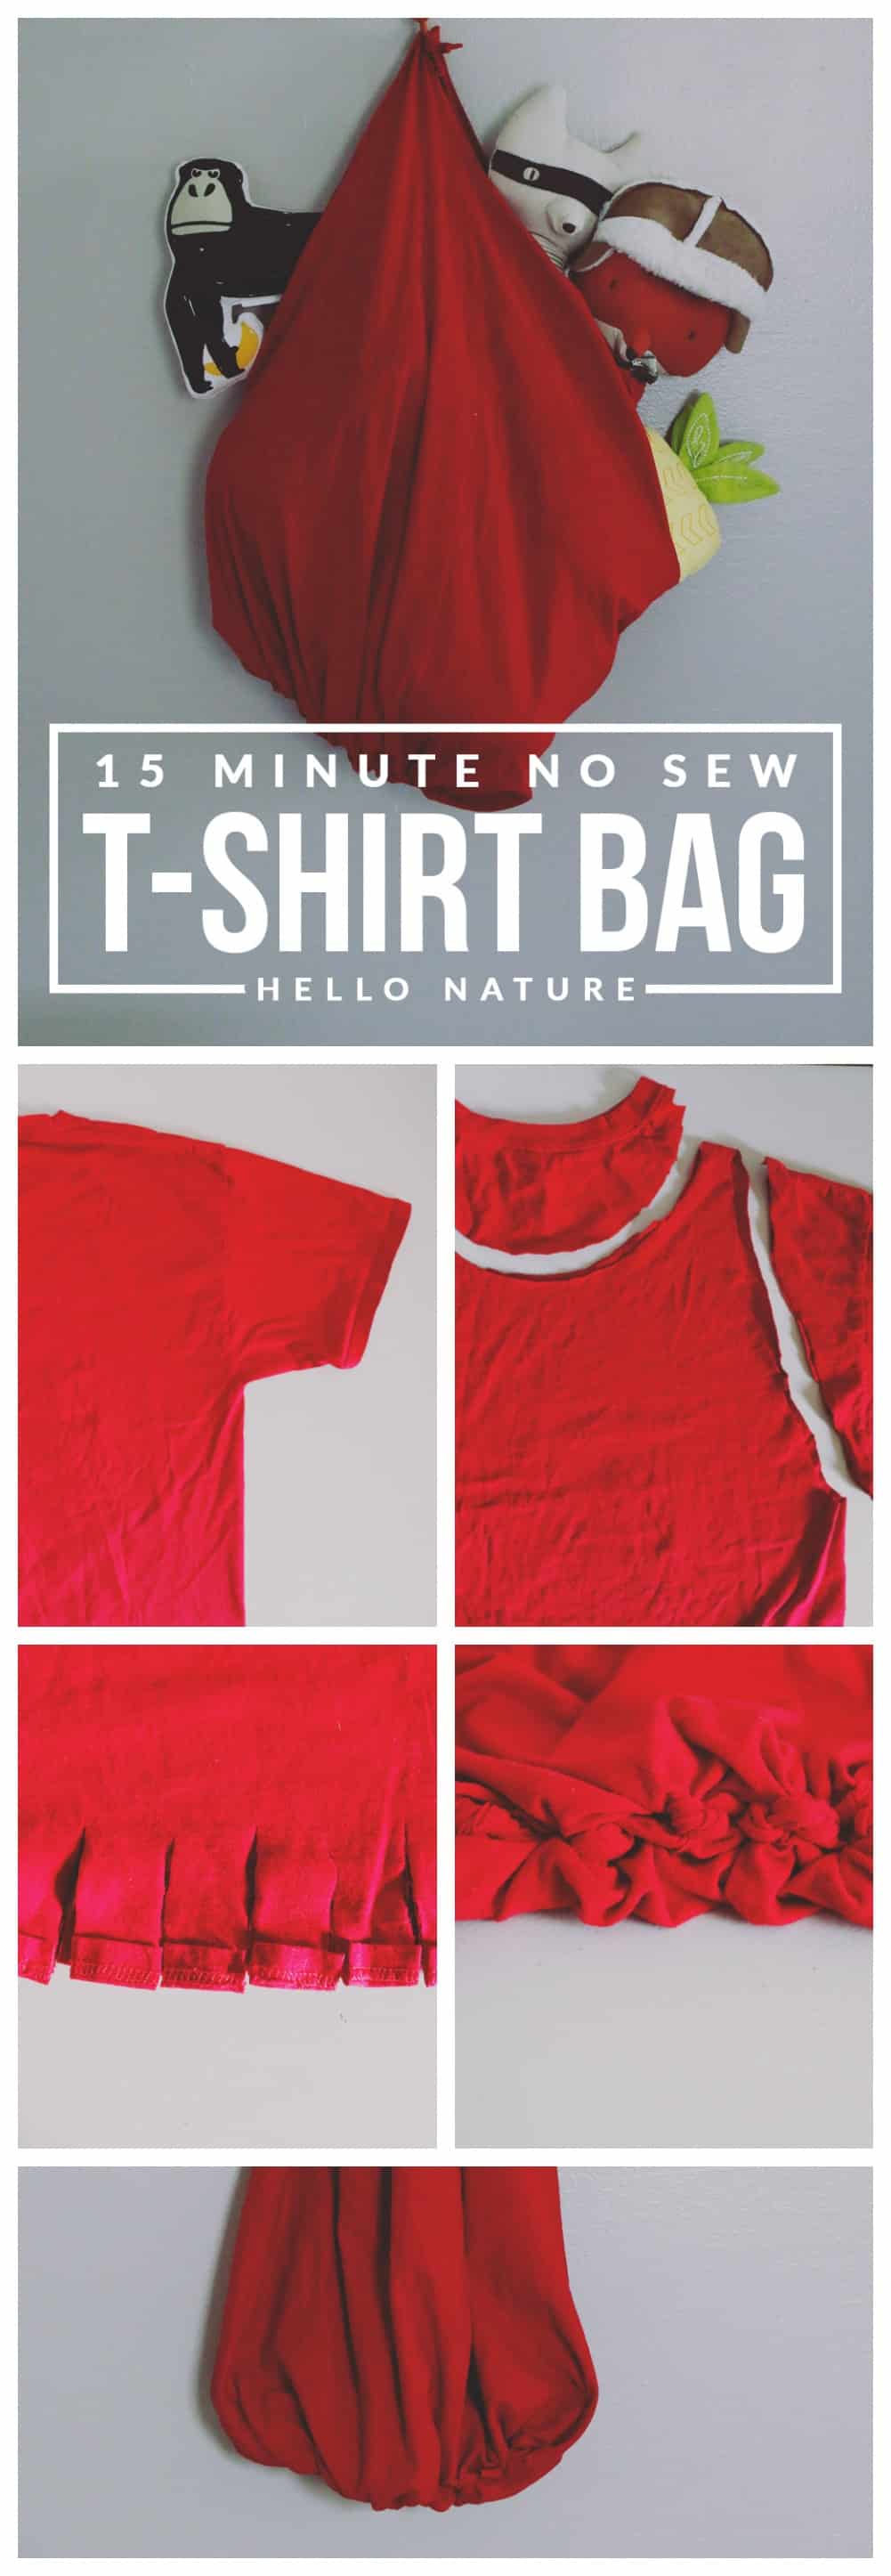 Not sure what to do with your old shirts? Make a no sew t-shirt bag! It's eco-friendly, takes less than 15 minutes to make and you'll have a custom bag!